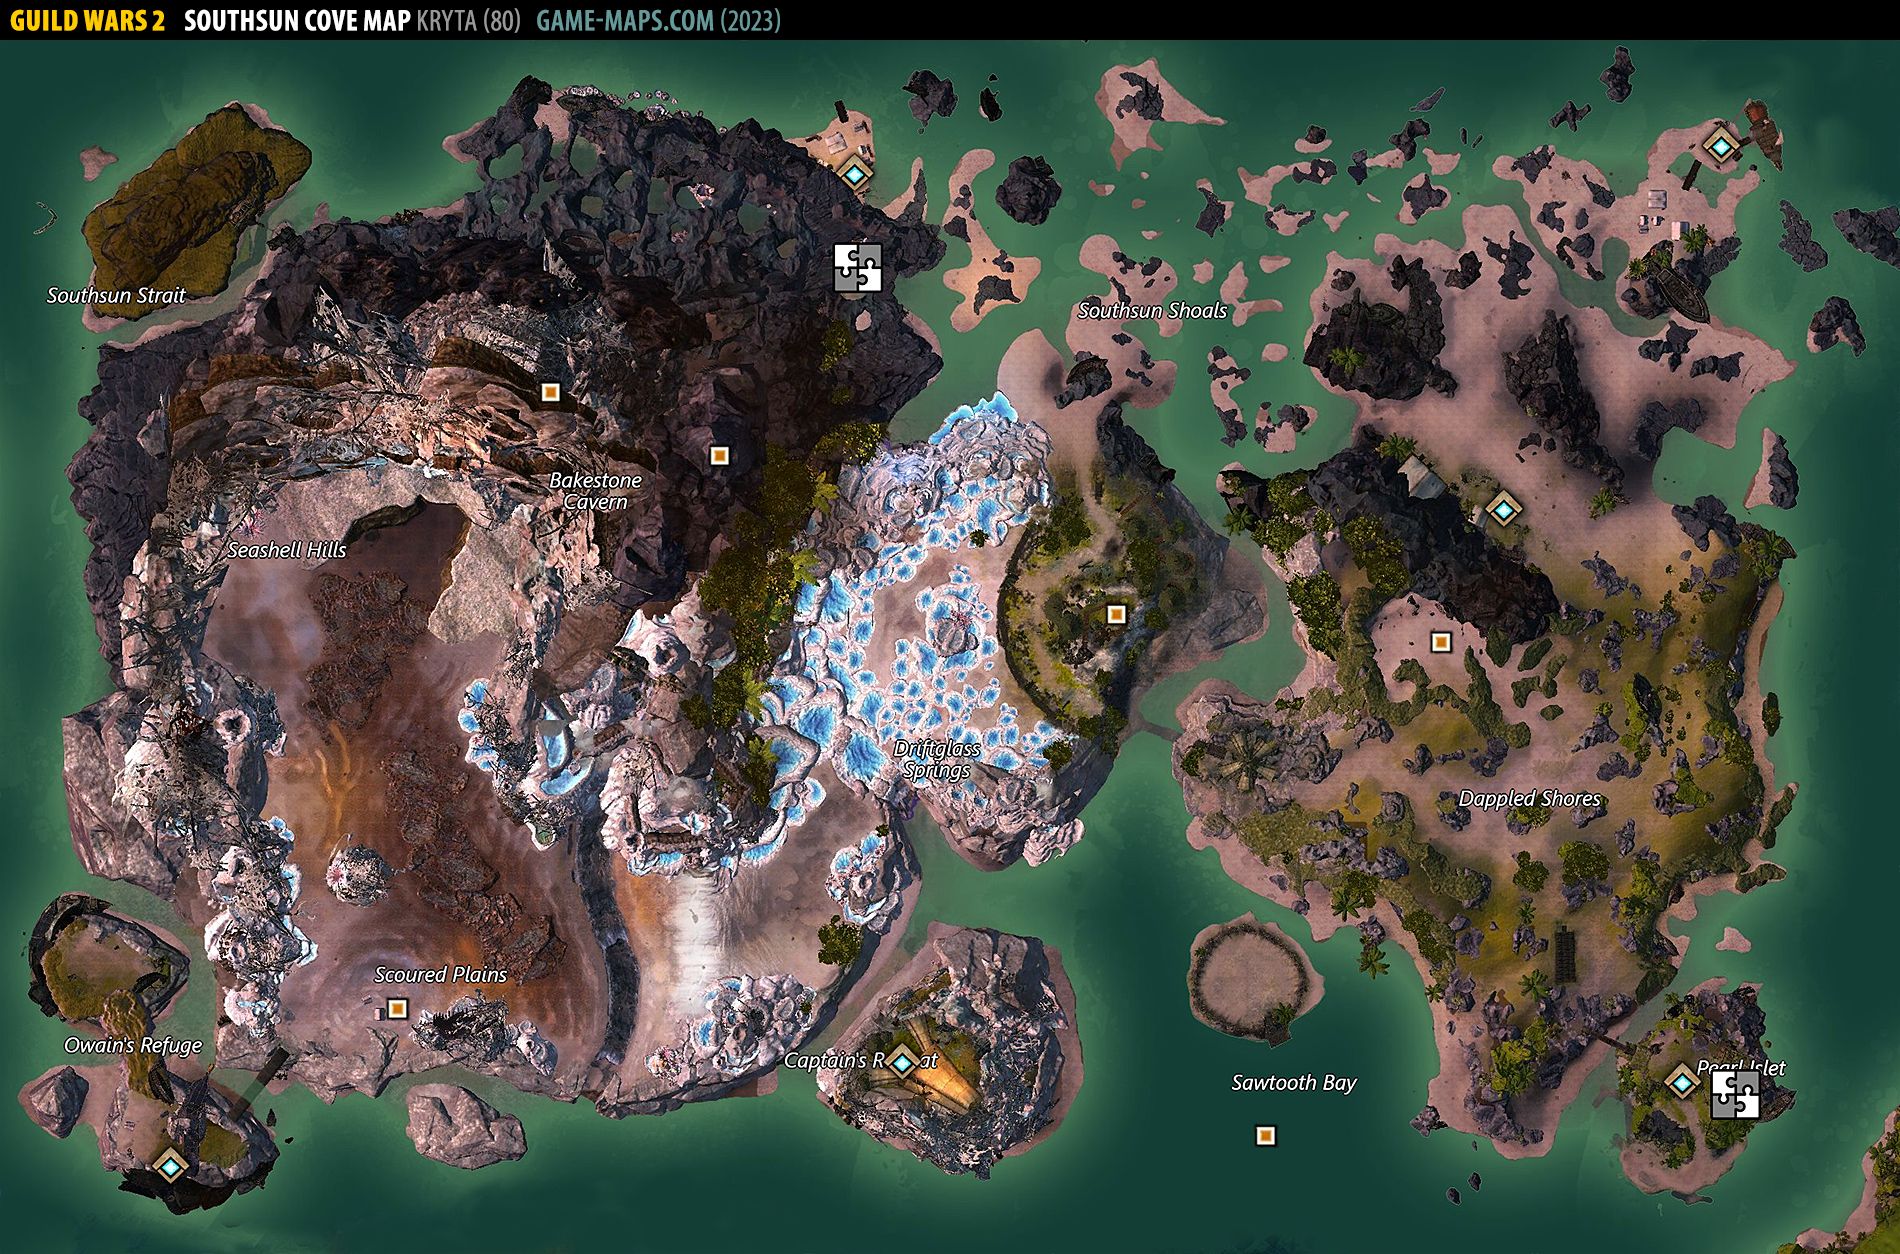 Southsun Cove Map for Guild Wars 2 (2019)